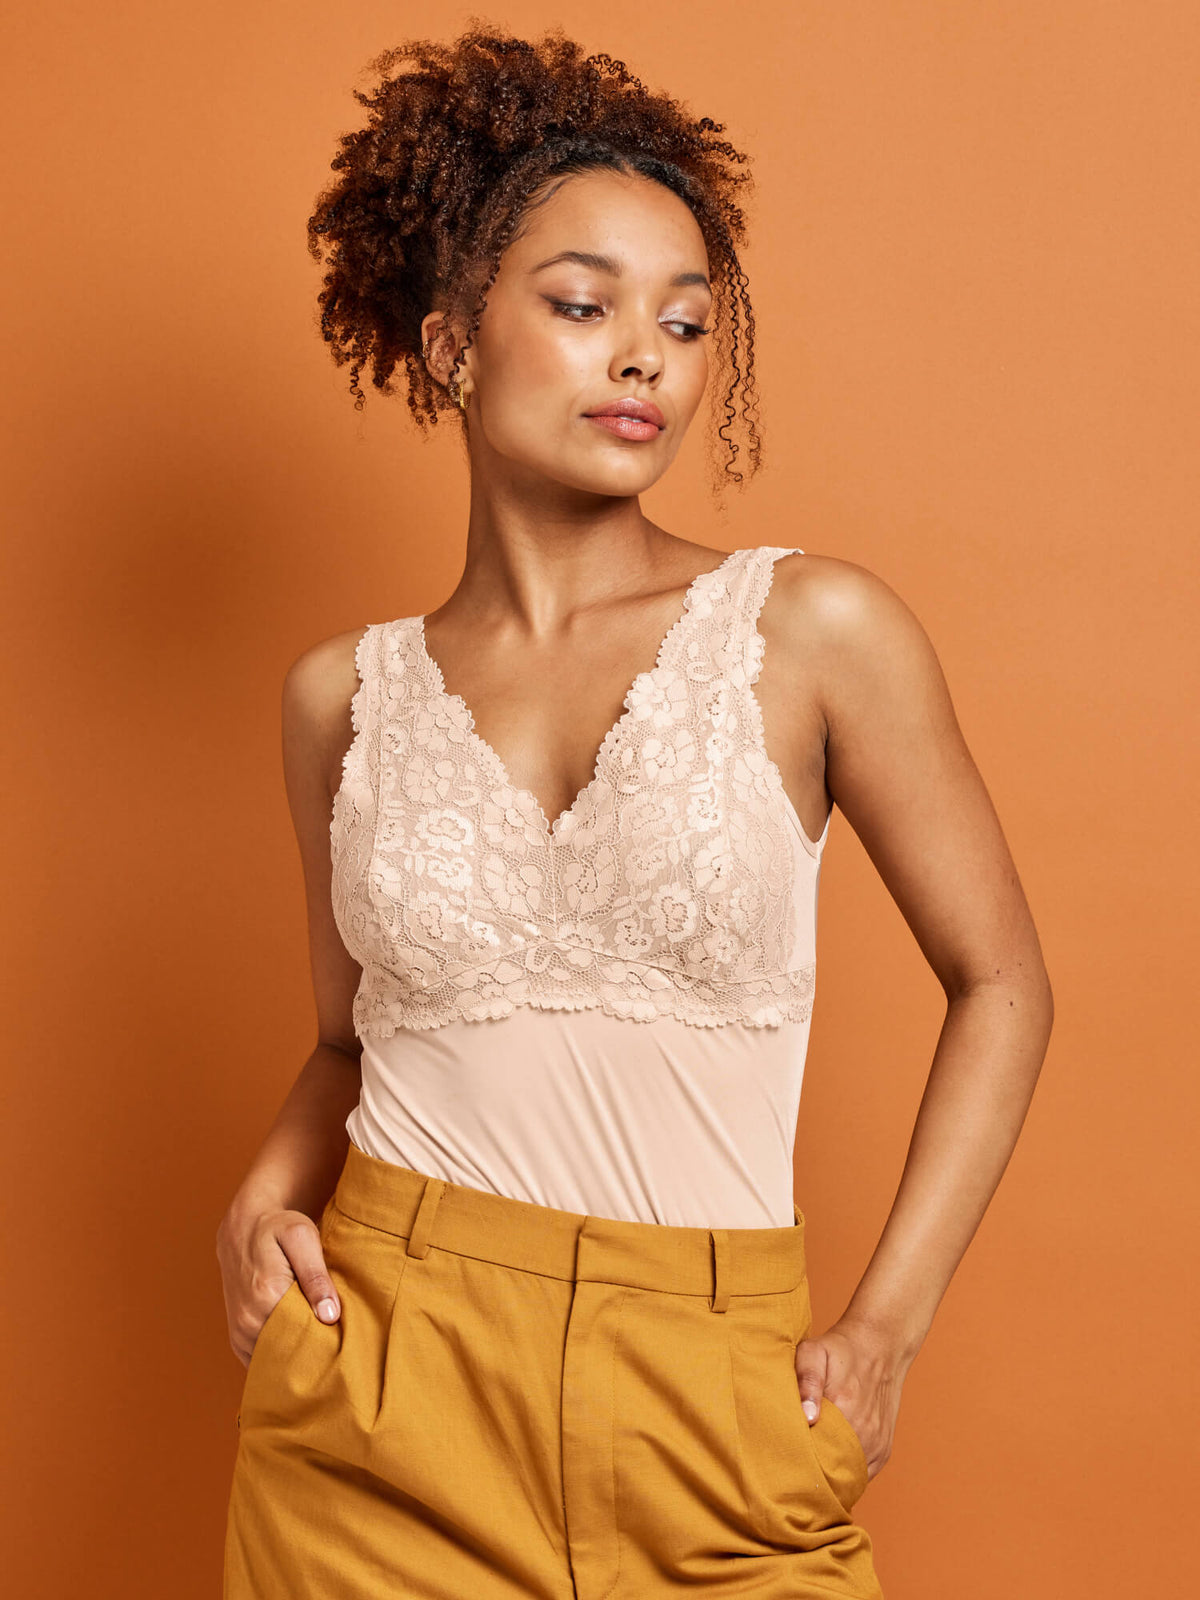 Helen Micro & Lace Camisole Top in Nude - Kayser Lingerie